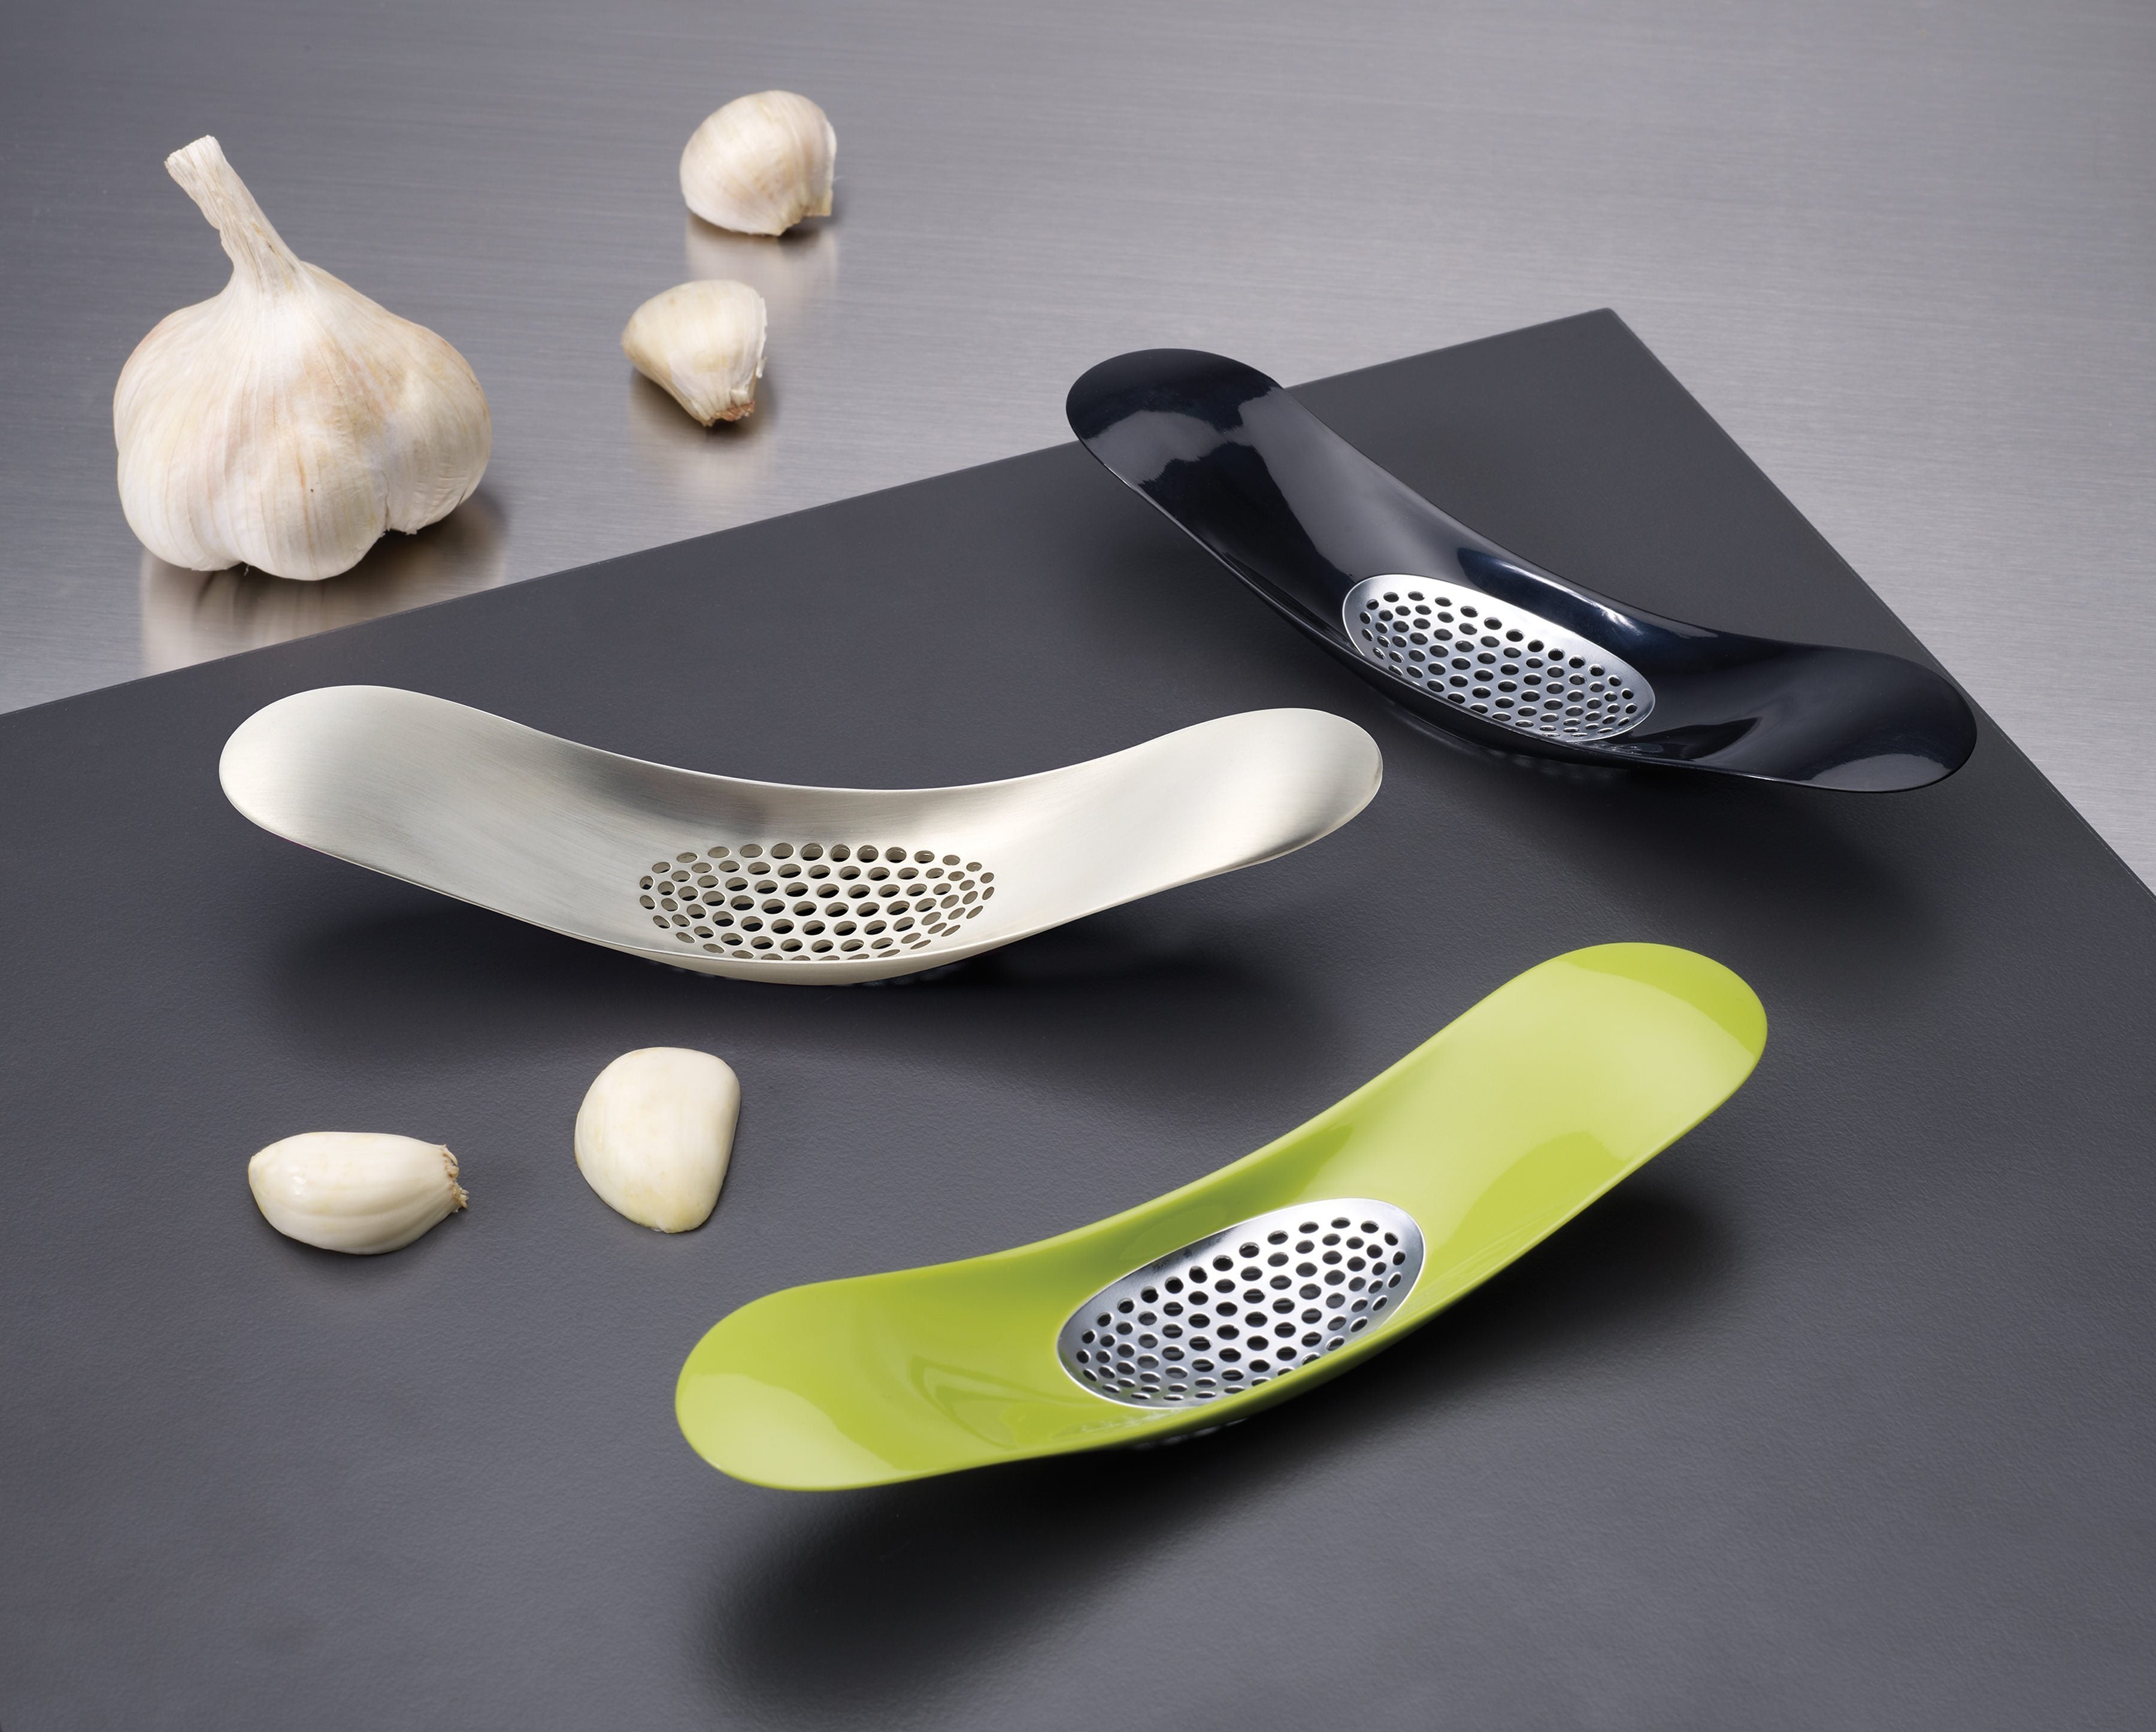 BEON.COM.AU  By using downward pressure and a ‘rocking’ motion, this stylish tool crushes garlic cloves quickly and easily without leaving any garlic odour on your hands.  Crush garlic by pushing and rocking back and forth over cloves Crushed garlic collected in bowl shaped design Can easily be scooped into ... Joseph Joseph at BEON.COM.AU